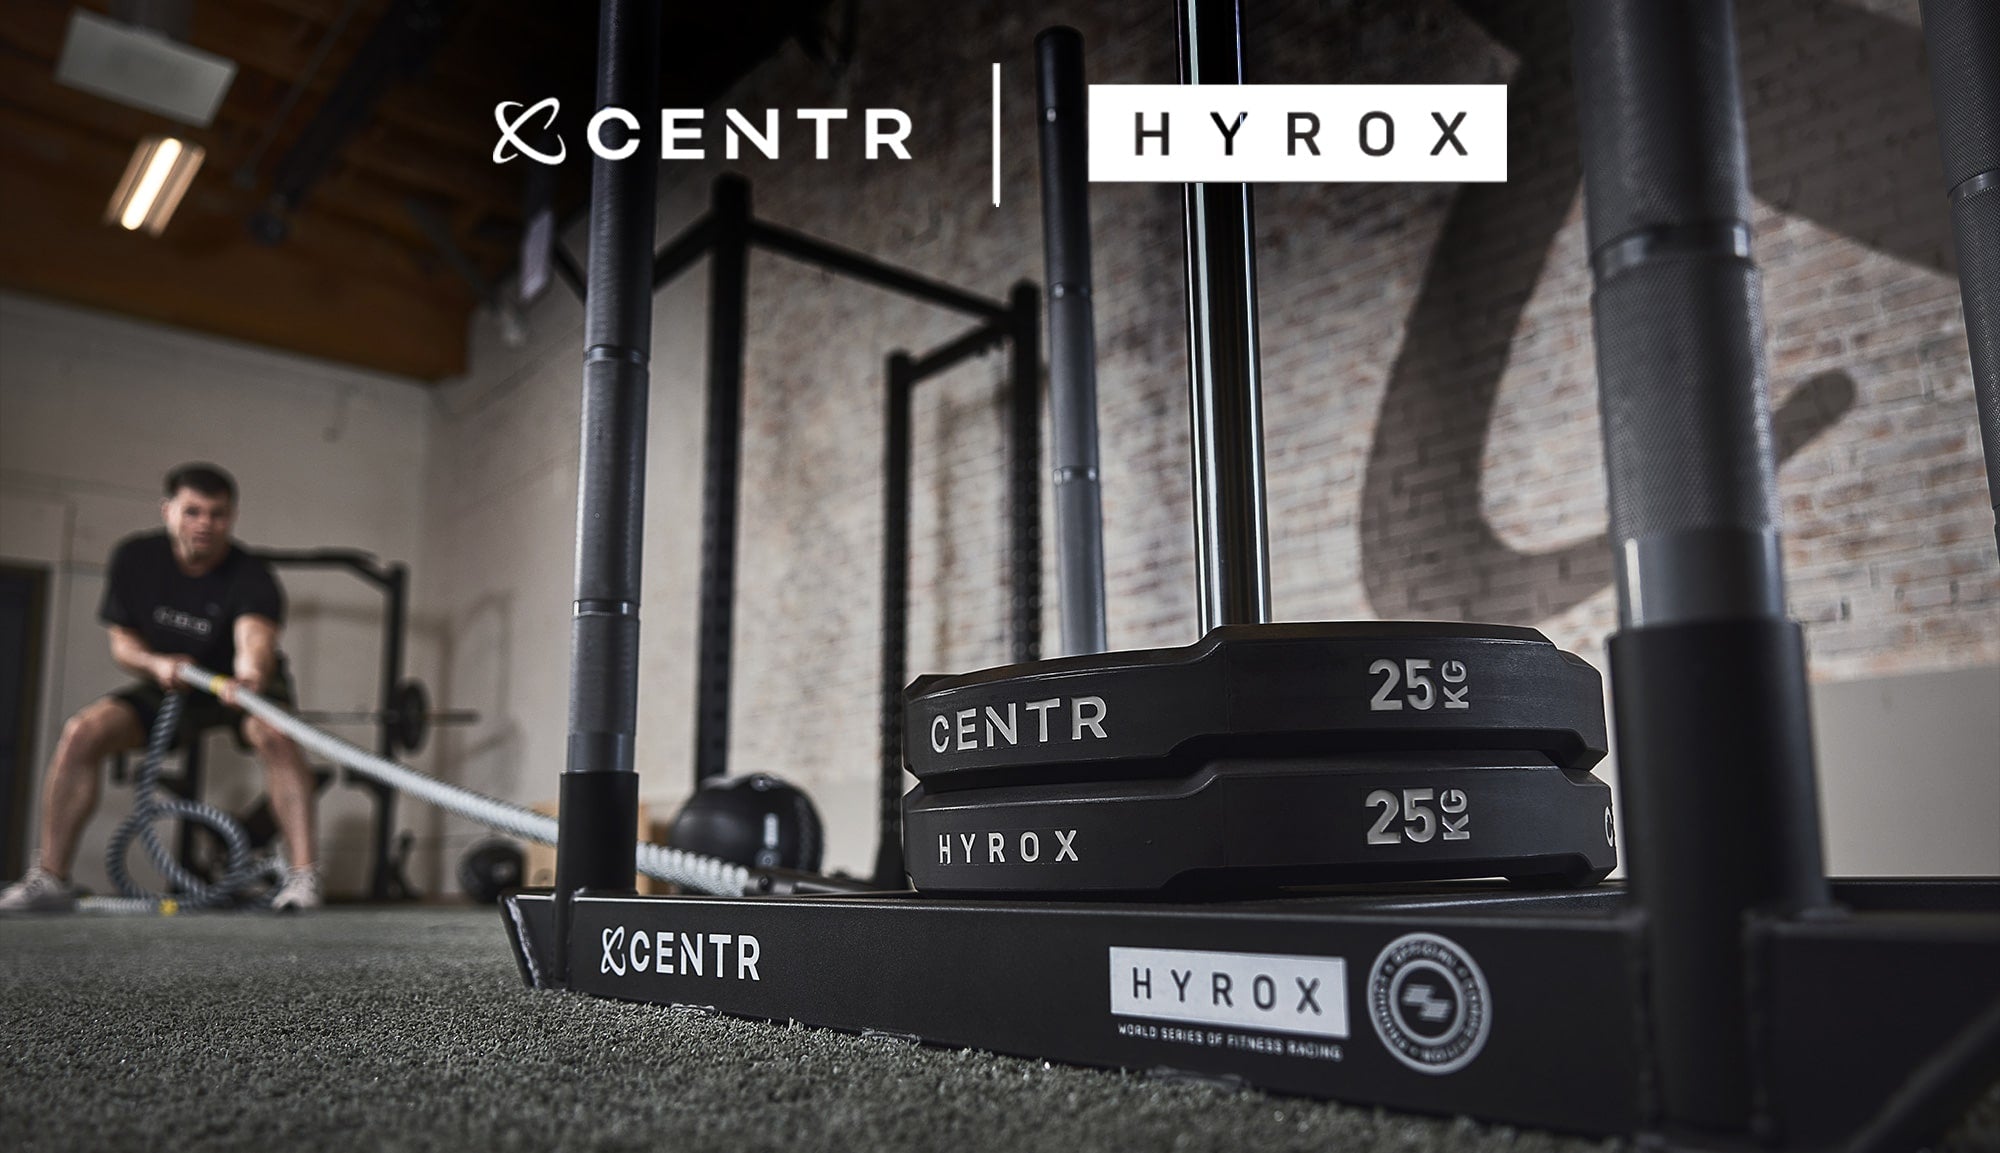 CENTR x HYROX : Our new partnership for the biggest global fitness race!